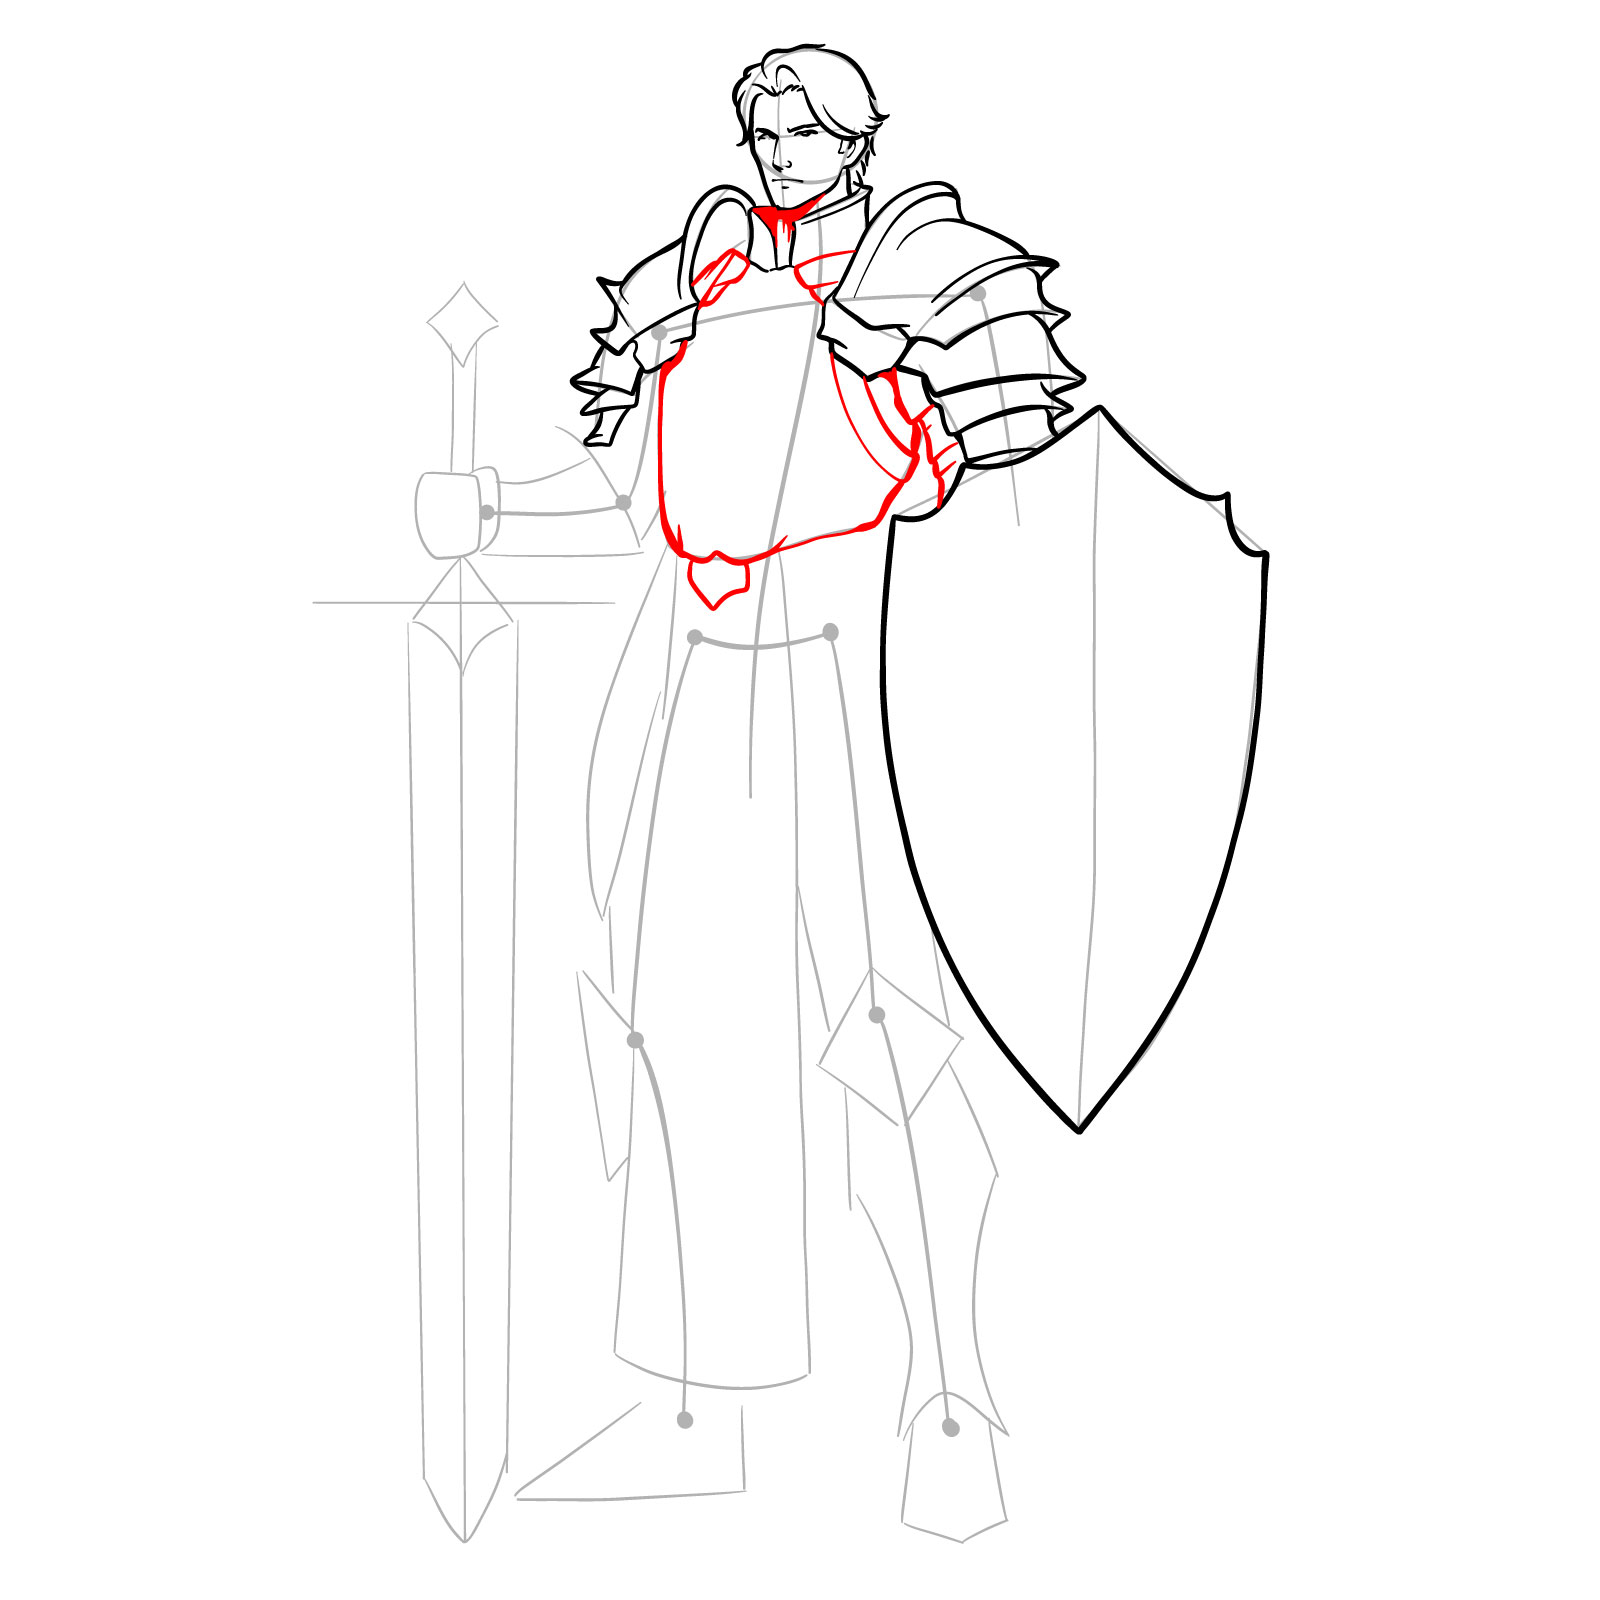 Adding shadows and details to the neck armor, body, and shield arm of the paladin - step 12